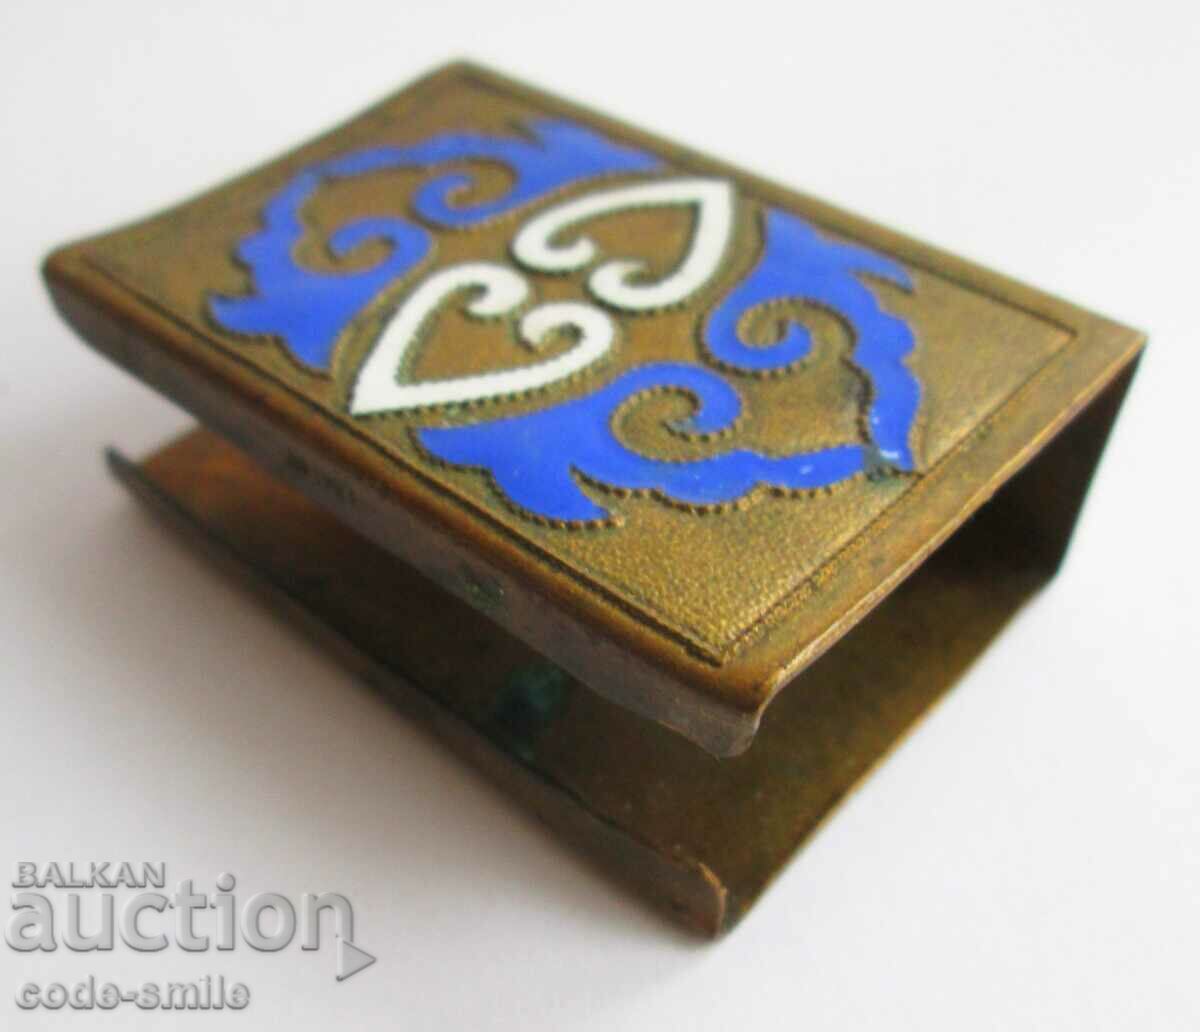 A beautiful old Russian matchbox with cellular enamel